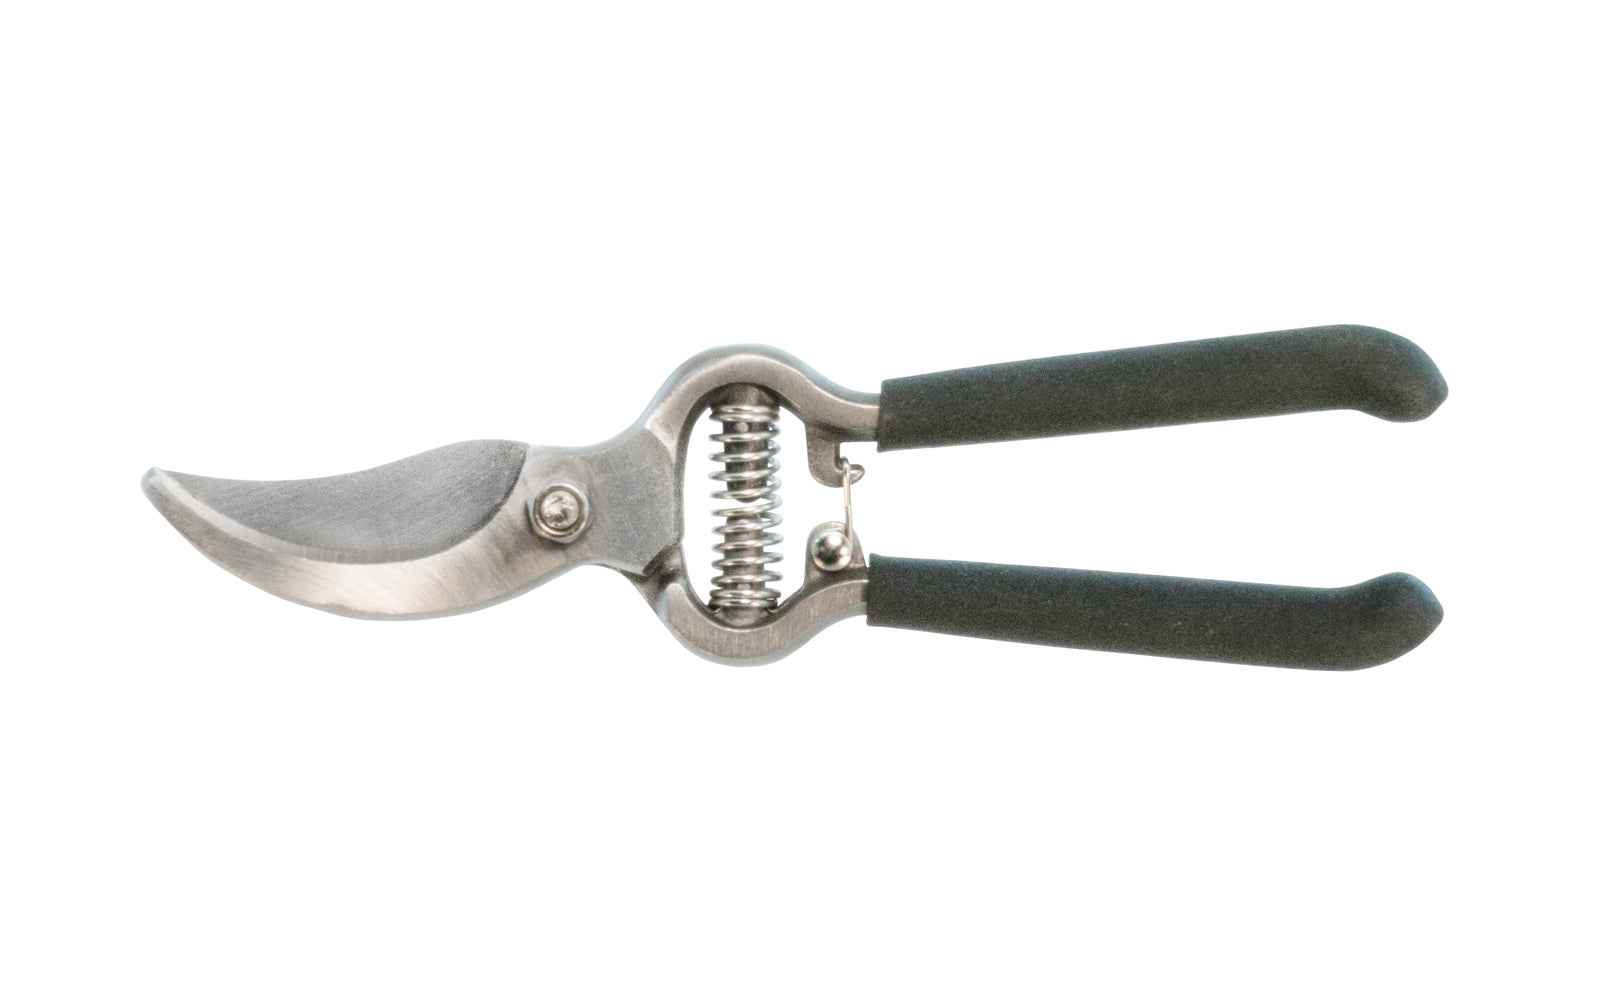 These drop forged bypass pruners have a precision ground blade with a cutting capacity of 5/8" cutting diameter max (live). Heavy-duty internal spring with a secure safety lock. Black nonslip grip handle. Great for use outdoors & in garden for floral trimming. Heavy duty internal spring for a cleaner cut. 8-1/4" length